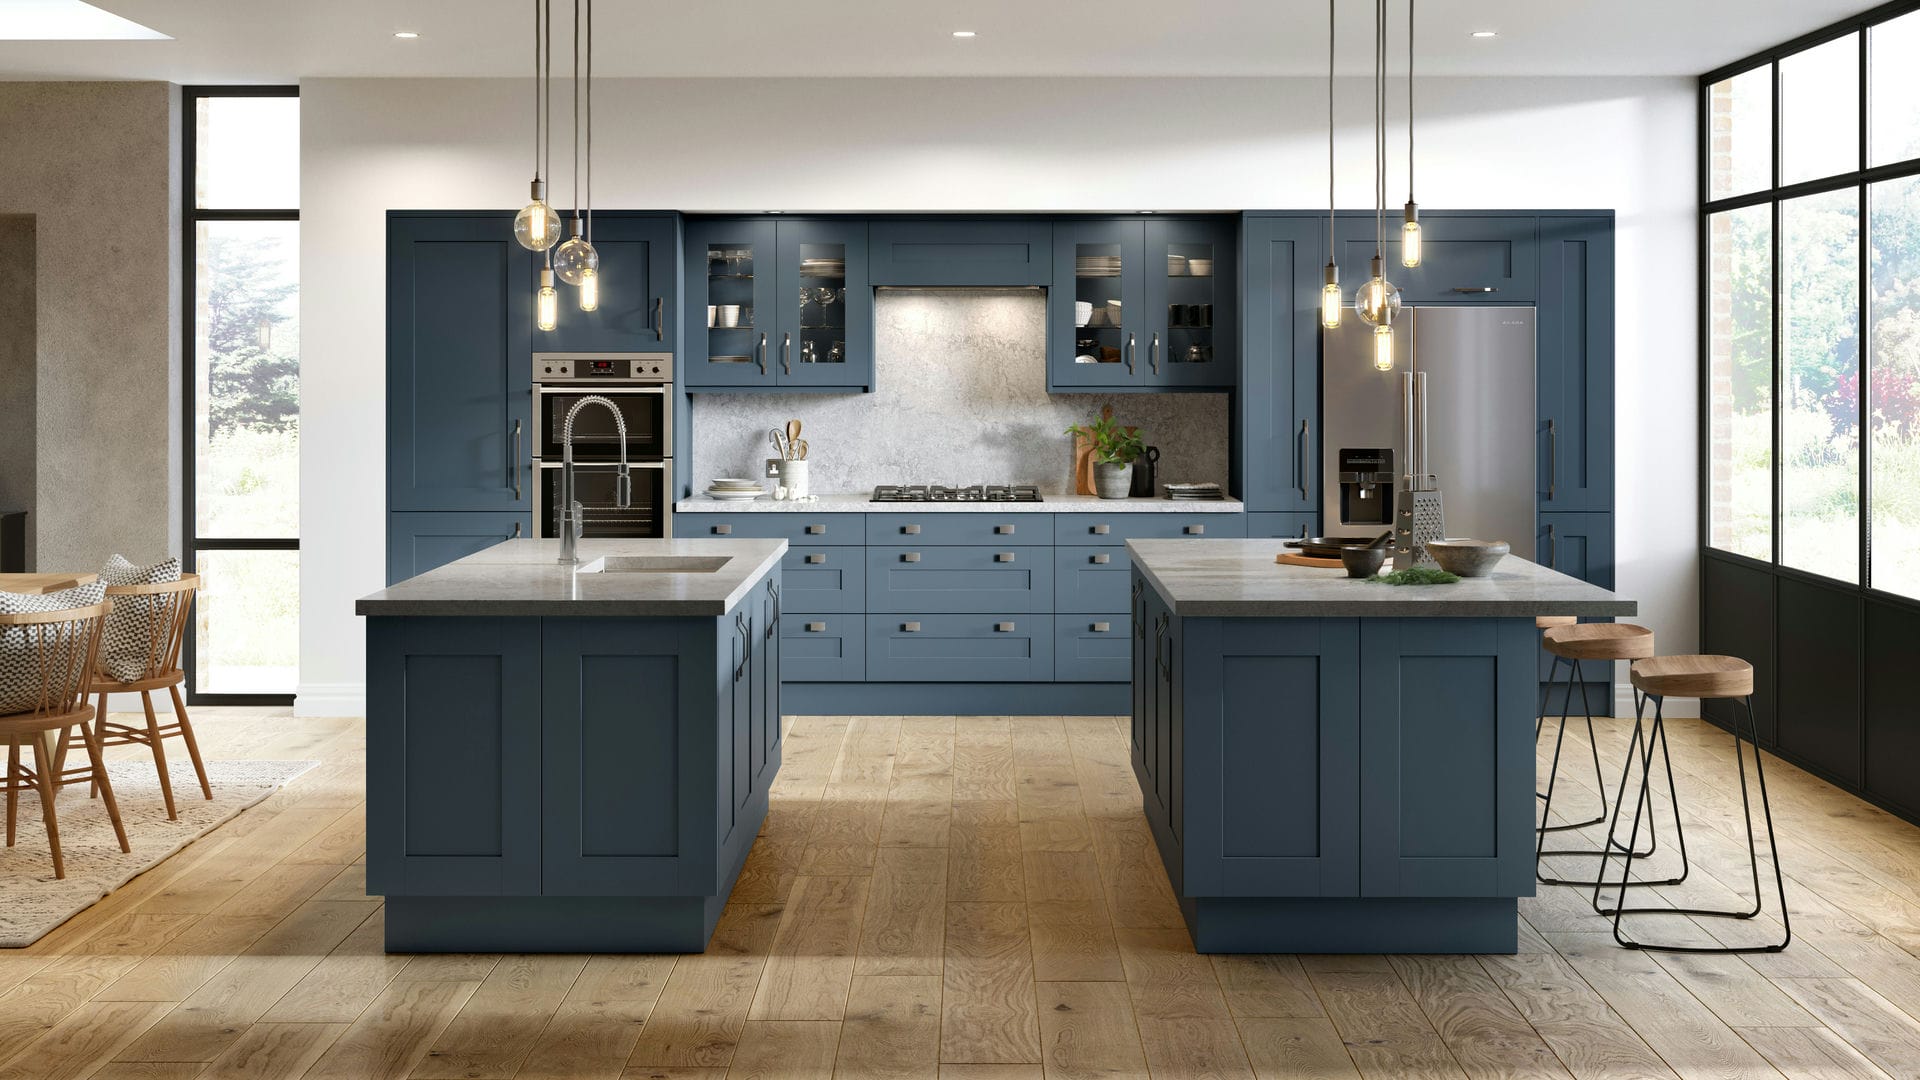 Luxury Shaker Ocean Blue kitchens combining timeless shaker style with the depth of the ocean's blue